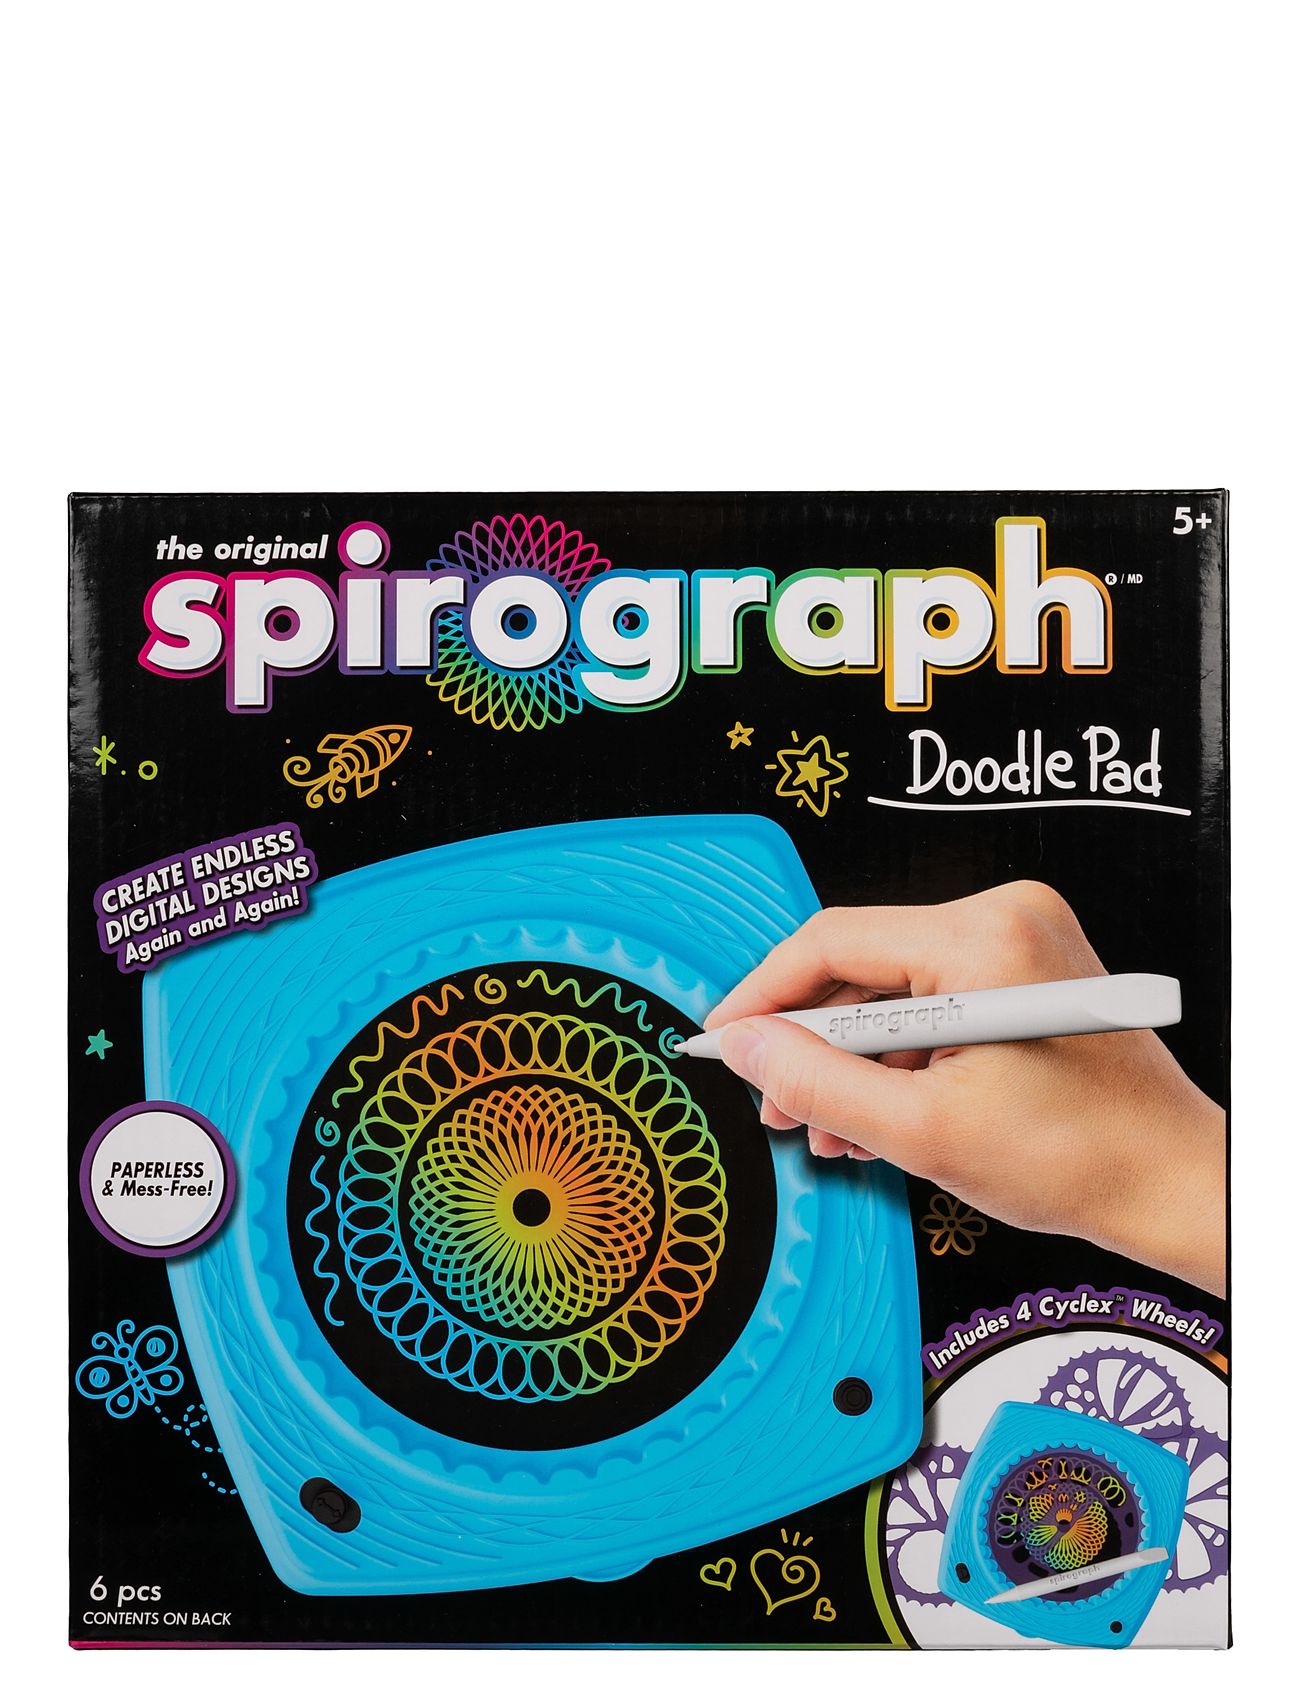 Spirograph Doodle Pad Toys Creativity Drawing & Crafts Craft Craft Sets Multi/patterned Martinex